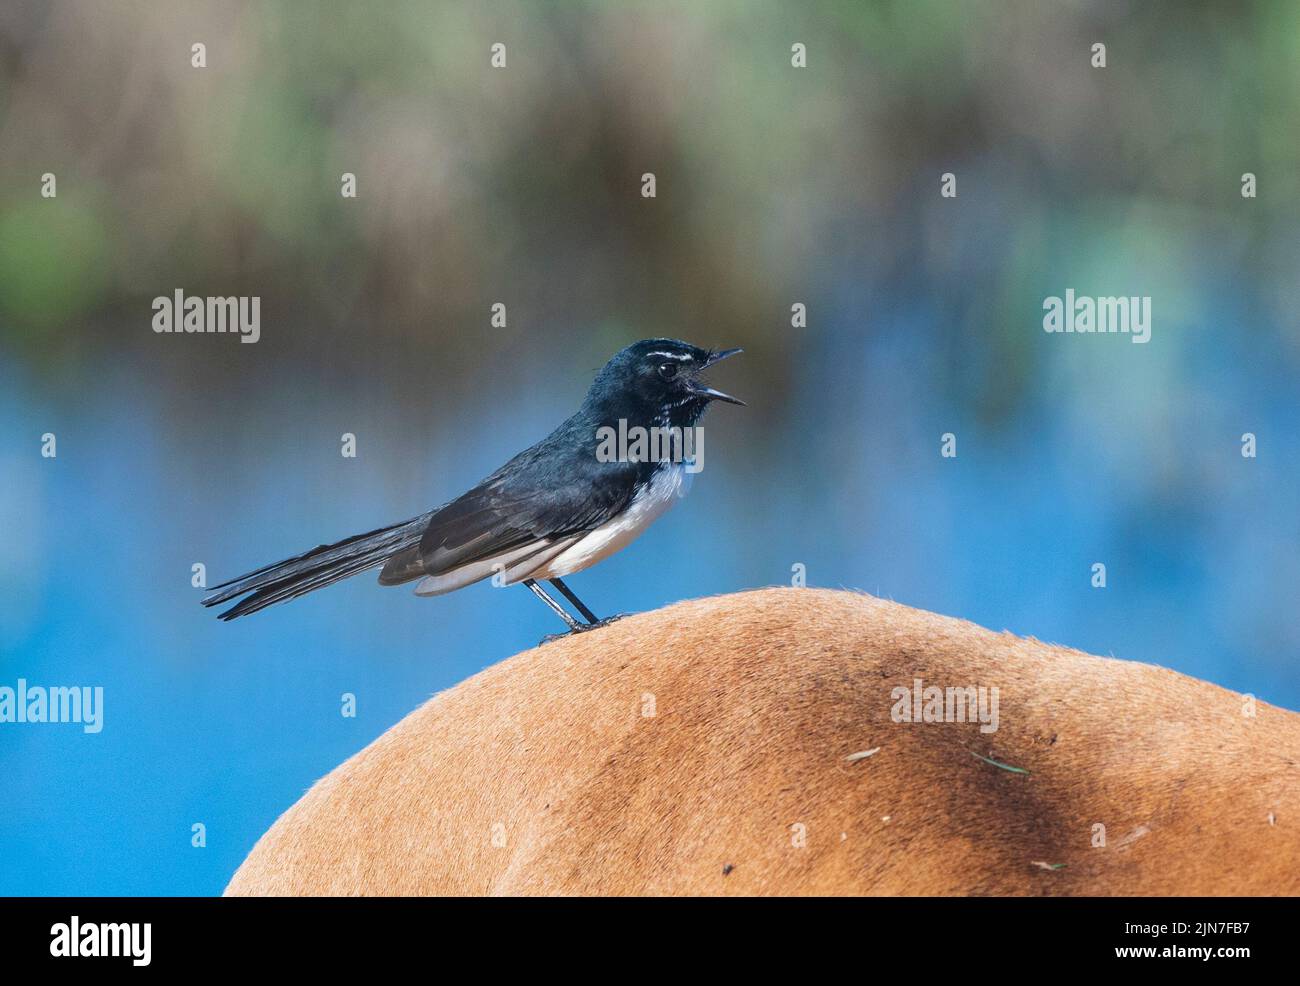 Willie Wagtail (Rhipidura leucophrys) with its beak open calling perched on cattle , Mungulla Station, Queensland, QLD, Australia Stock Photo